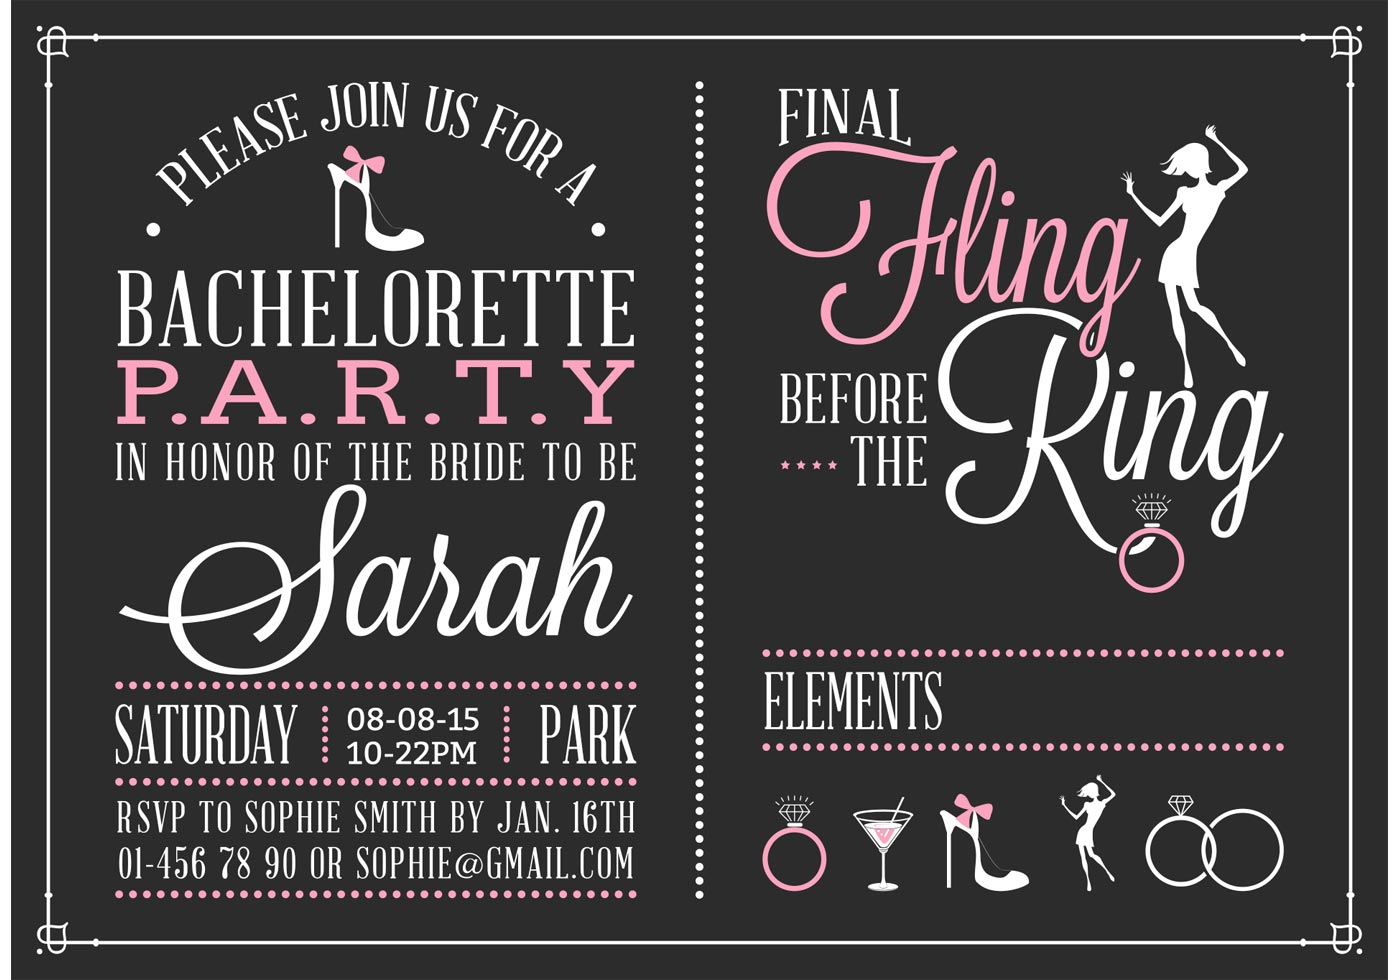 Bachelorette Party Invitation Vector Download Free Vector Art in size 1400 X 980